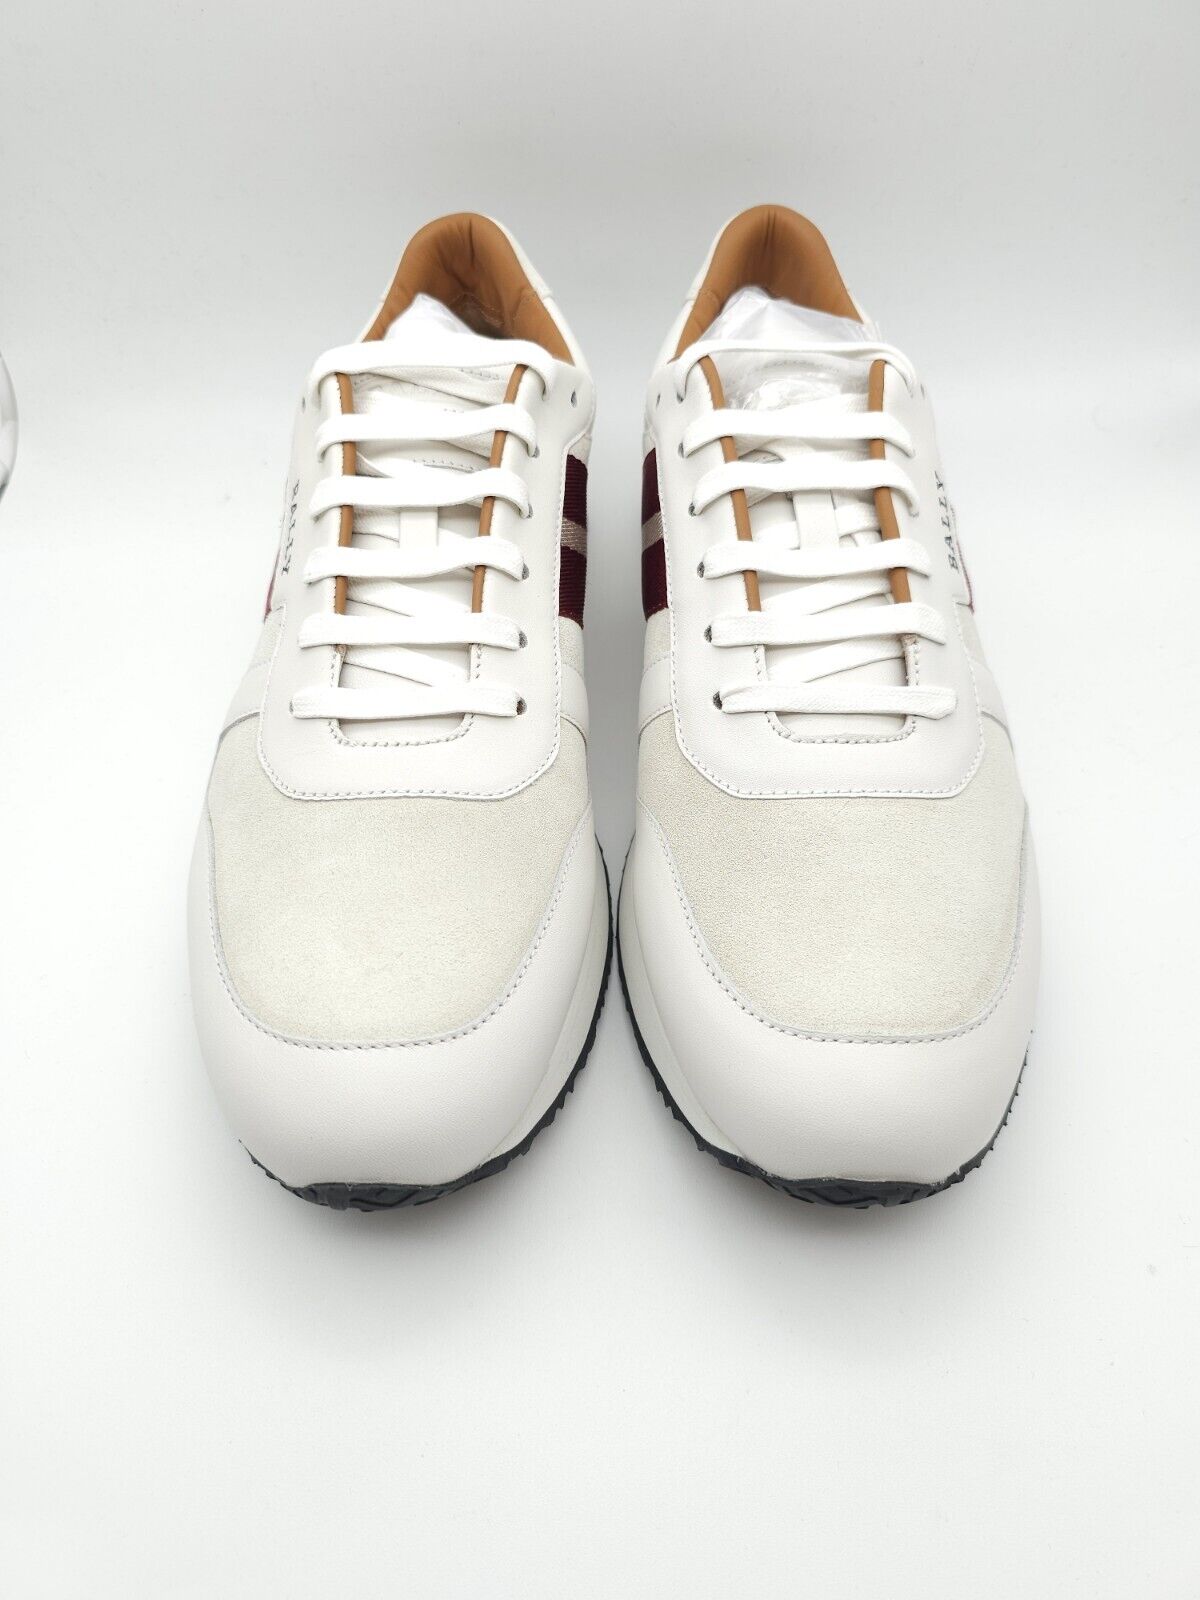 Bally Sprinter Calf Plain Leather Suede Sneaker Shoes White 13  $650 GL023064